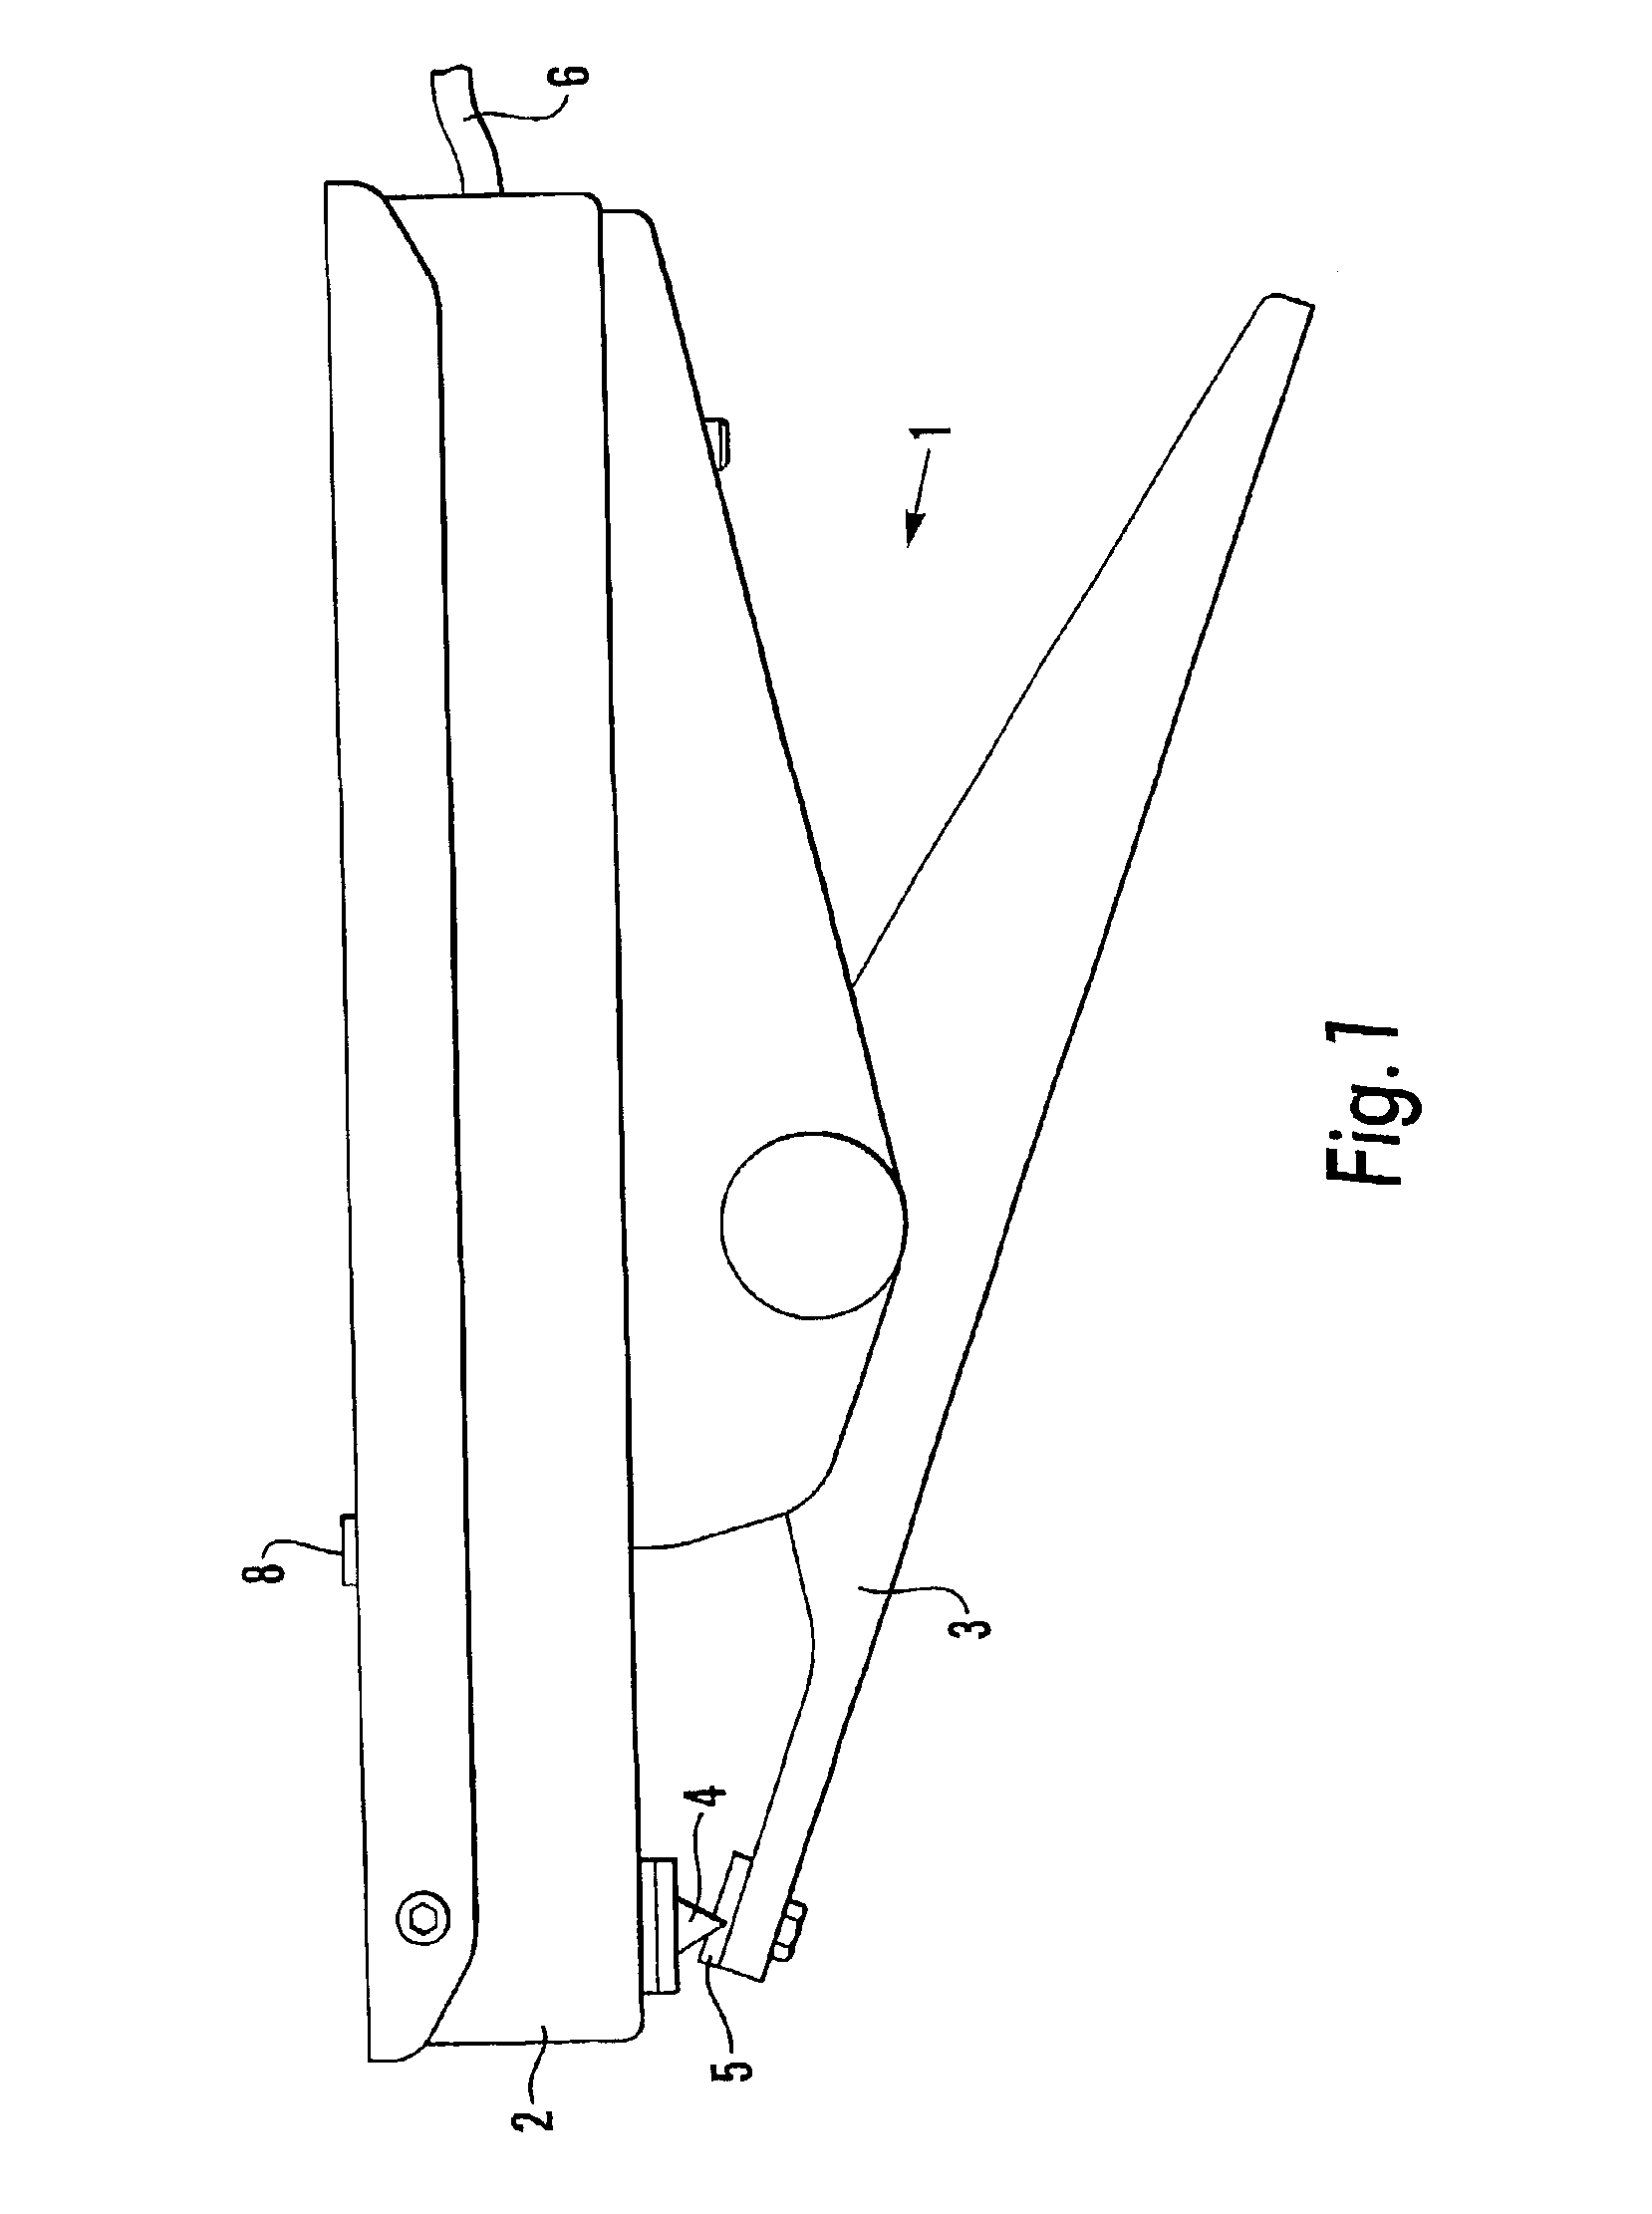 Electrical resistance monitoring device